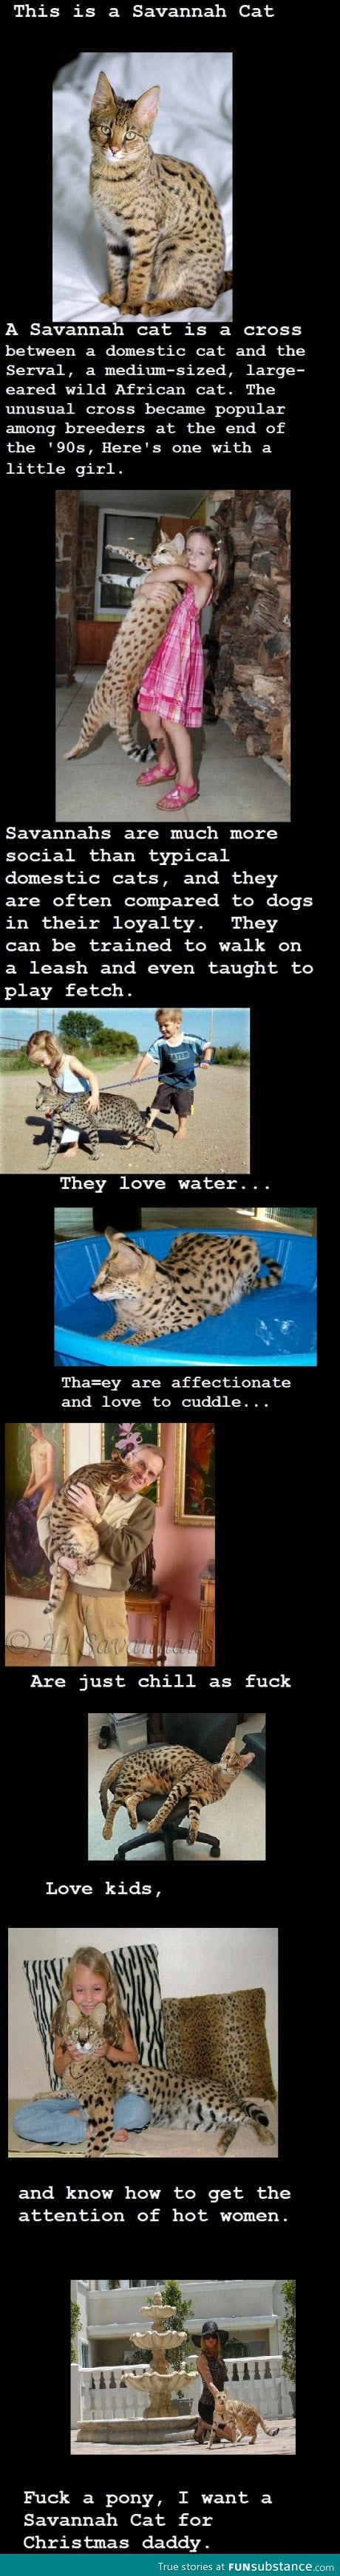 I want a savannah cat and I want it now